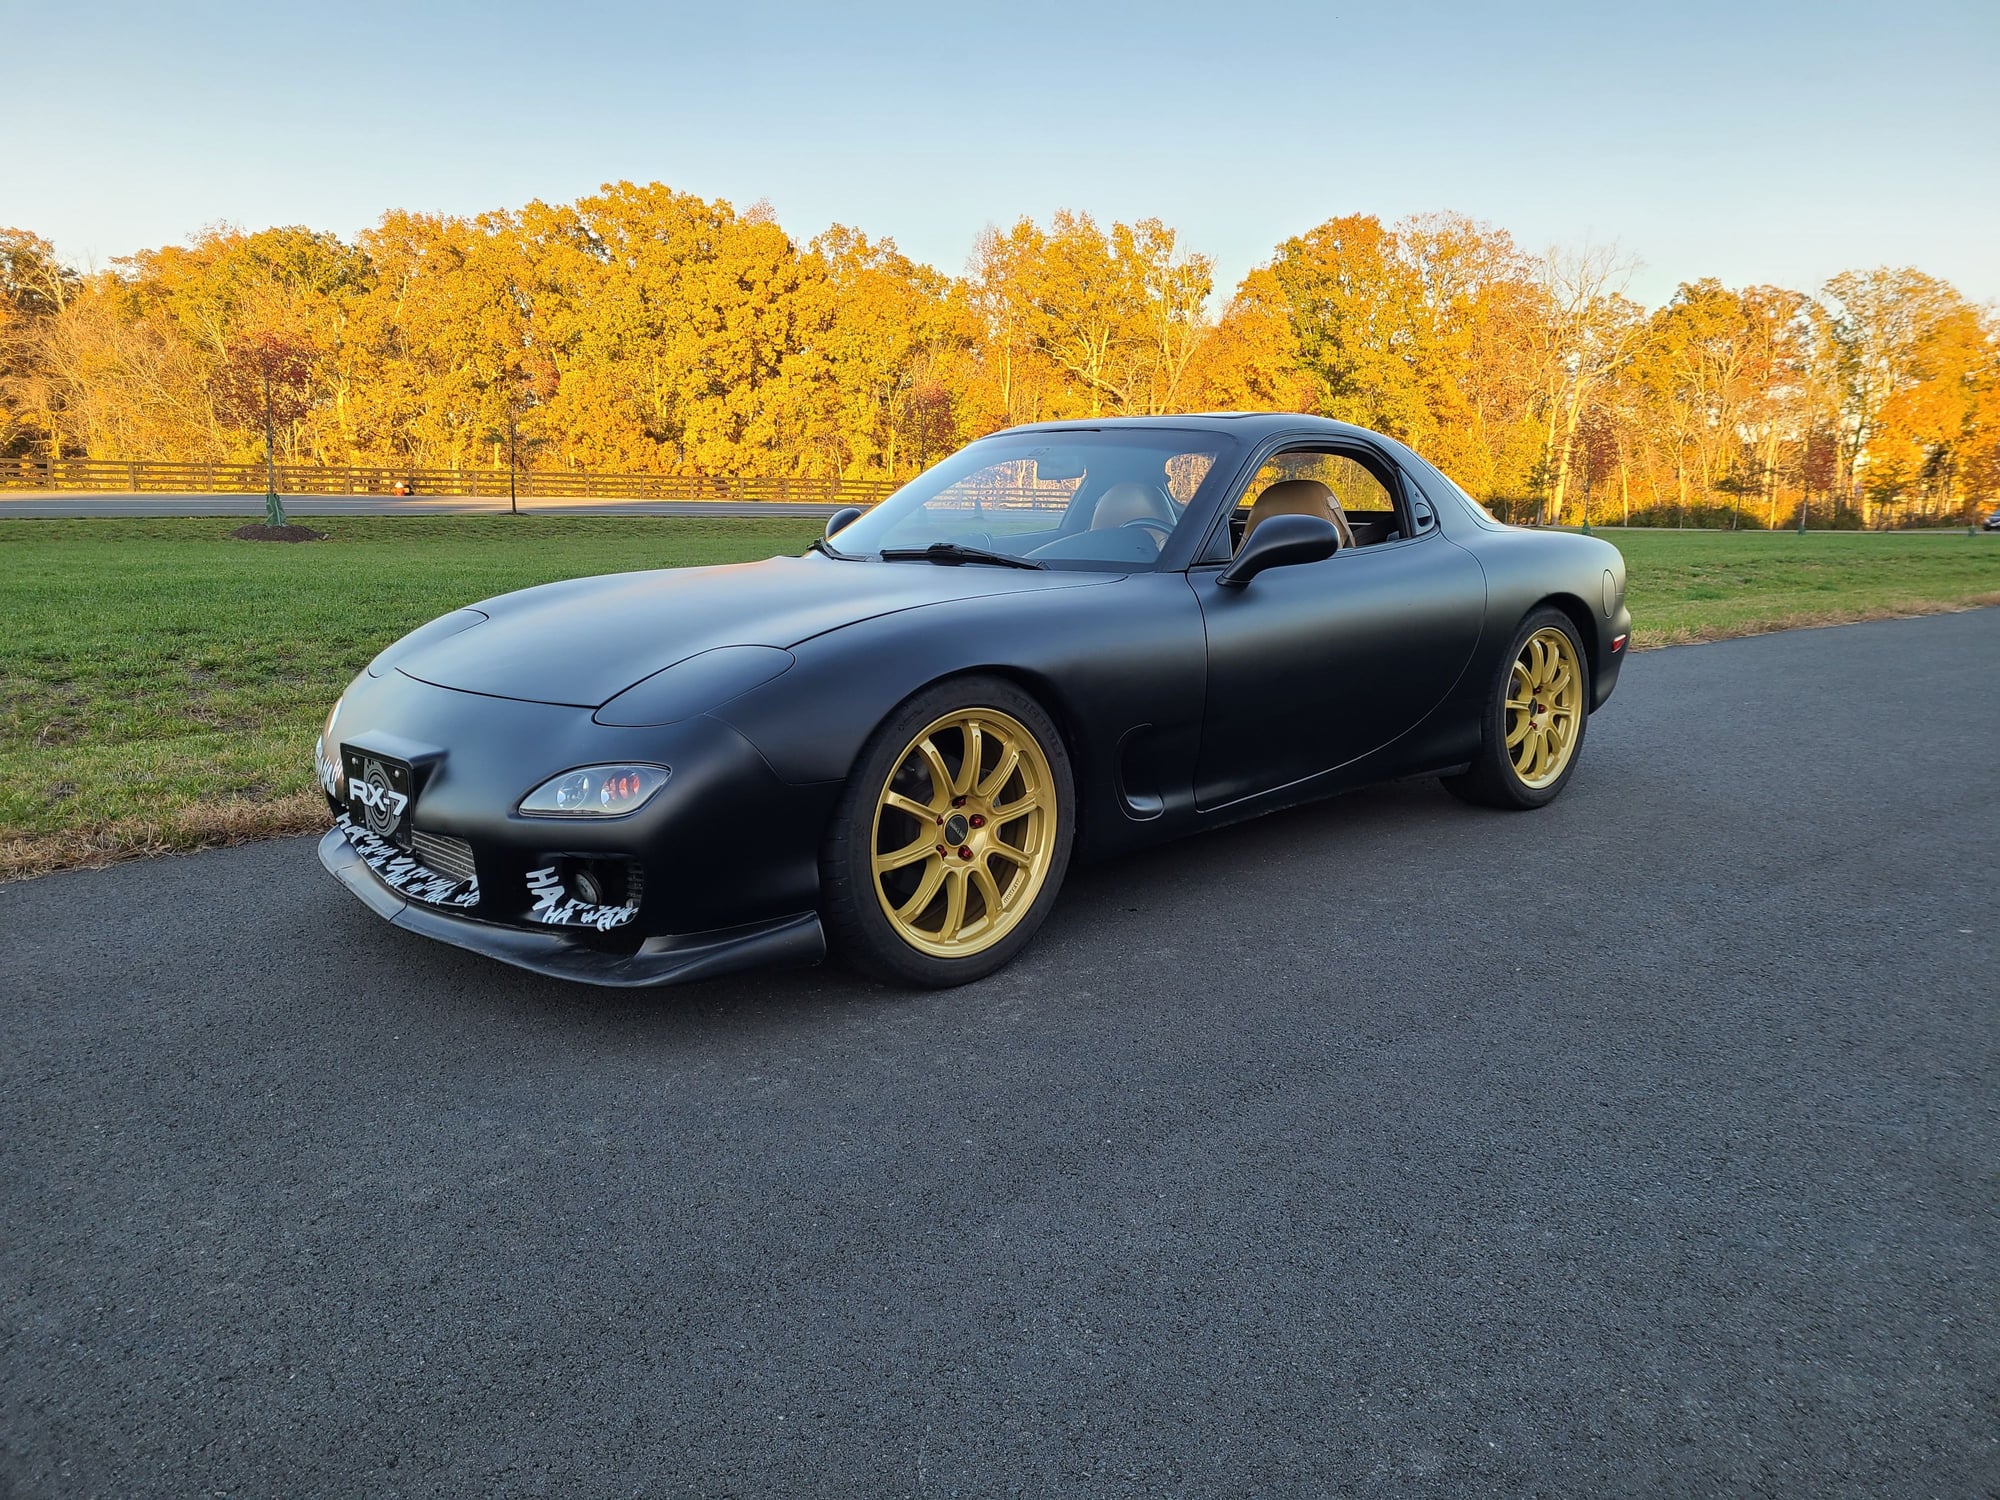 1994 Mazda RX-7 - 1994 RX-7 Single Turbo Bridgeport - Used - VIN JM1FD333XR0301653 - 134,000 Miles - 2 cyl - 2WD - Manual - Coupe - Other - Aldie, VA 20105, United States